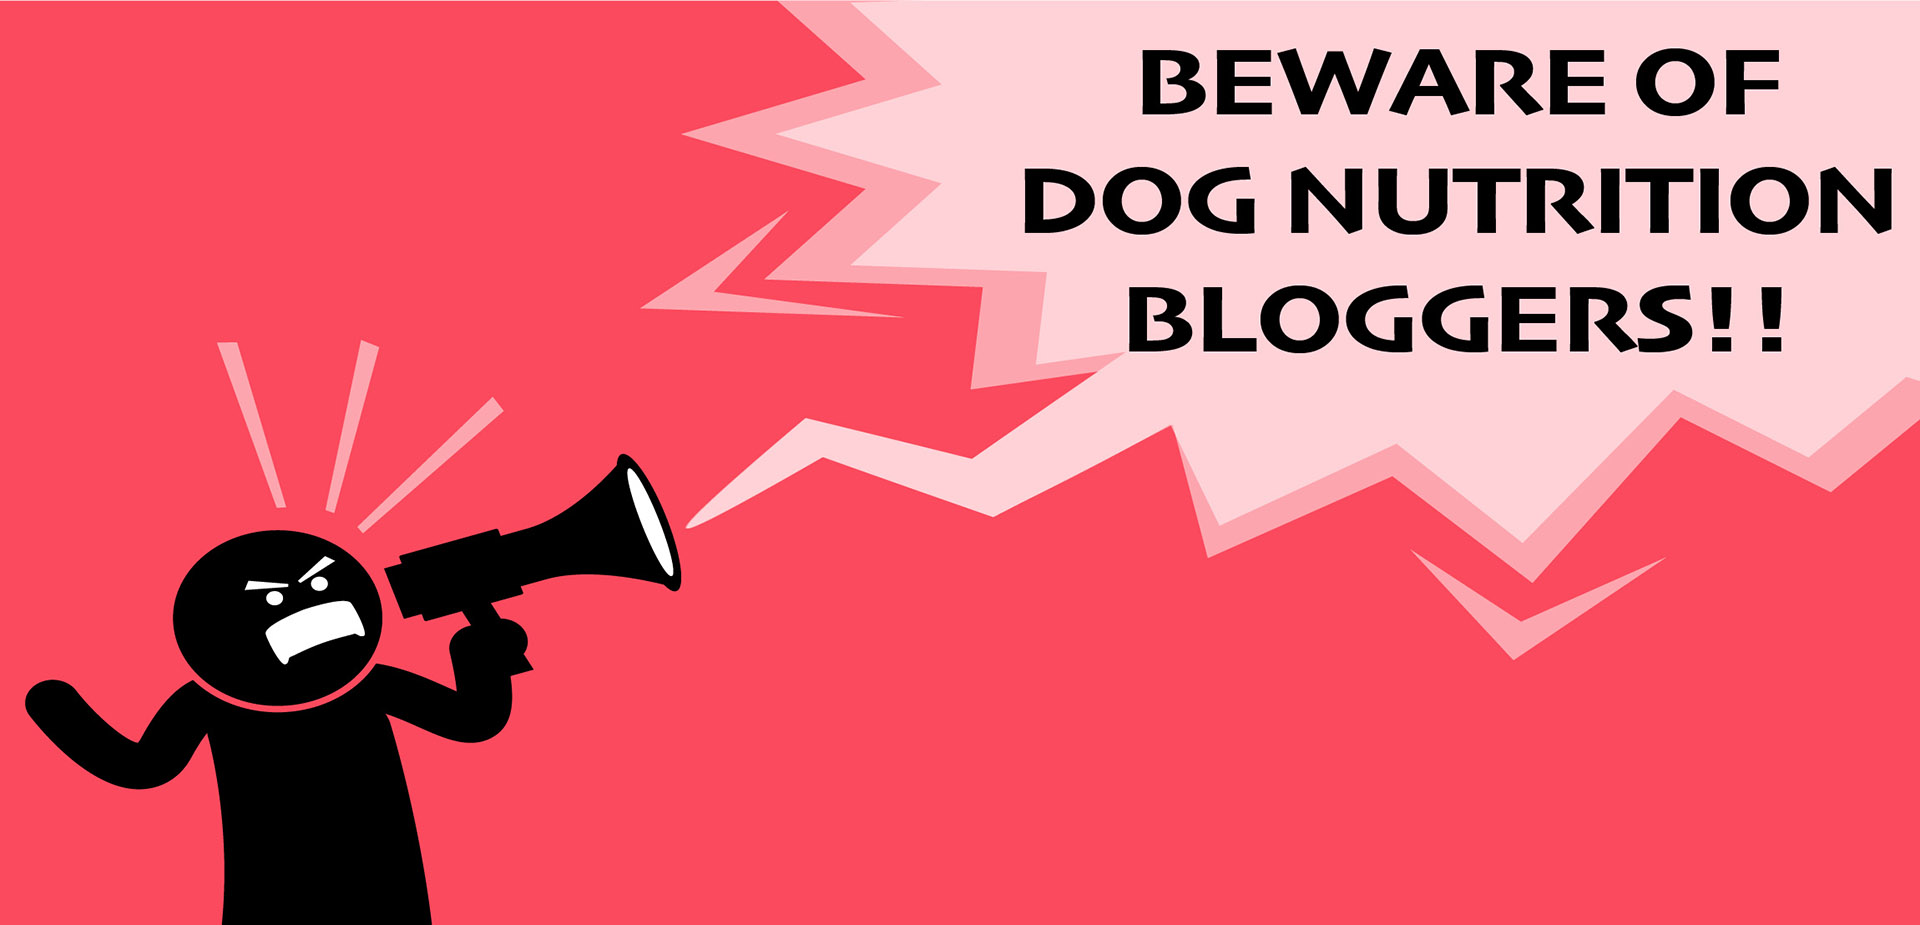 Graphic showing man blowhorn shouting "Beware of Dog Nutrition Bloggers"